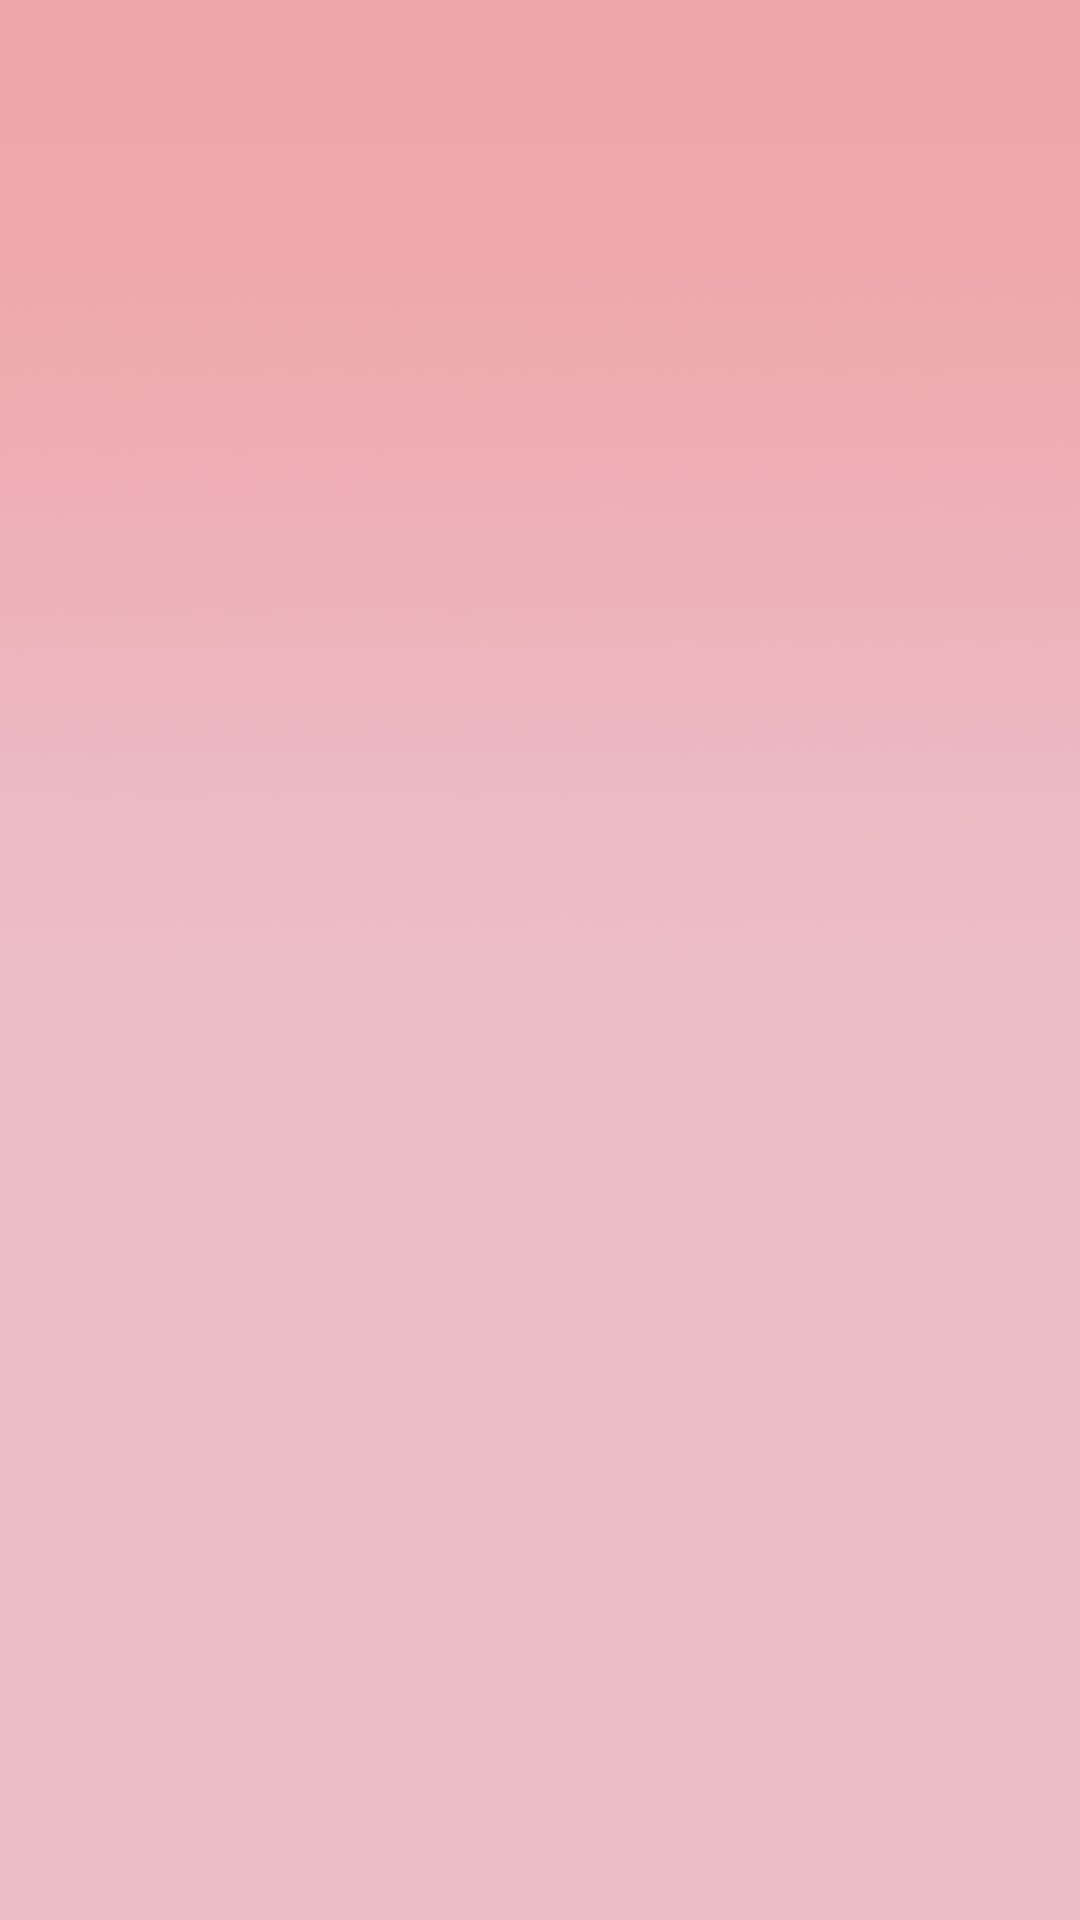 0+] Pink Solid Color Background s 